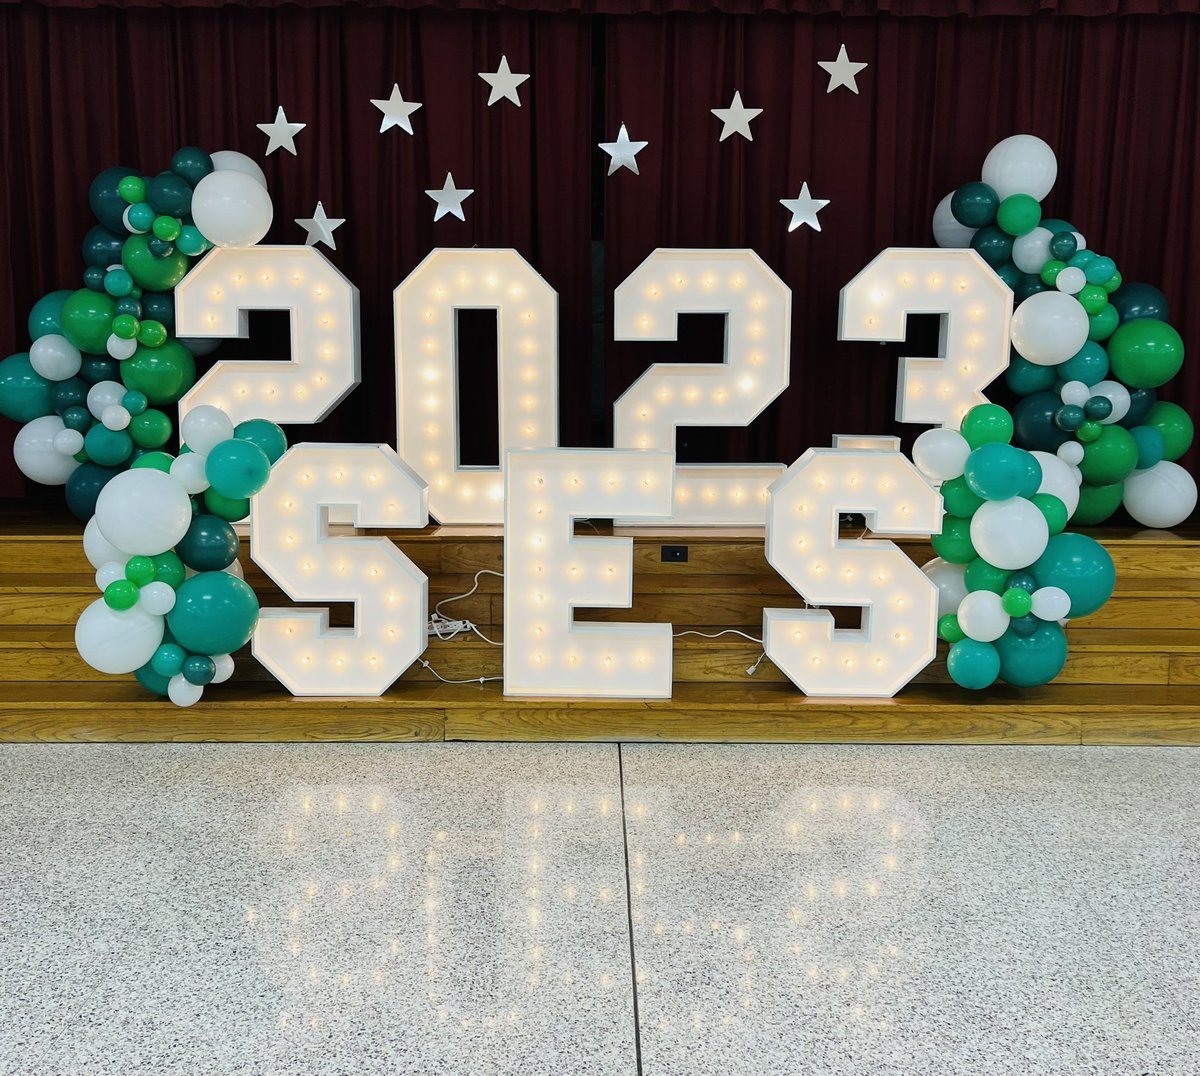 We had our awards ceremonies for 1st - 5th grade, and our students were so excited! 🤩Thank you to our Stehlik teachers and staff for working so hard and doing your best, I hope you all have a great summer! ☀️ Marquees and balloons by me 😌